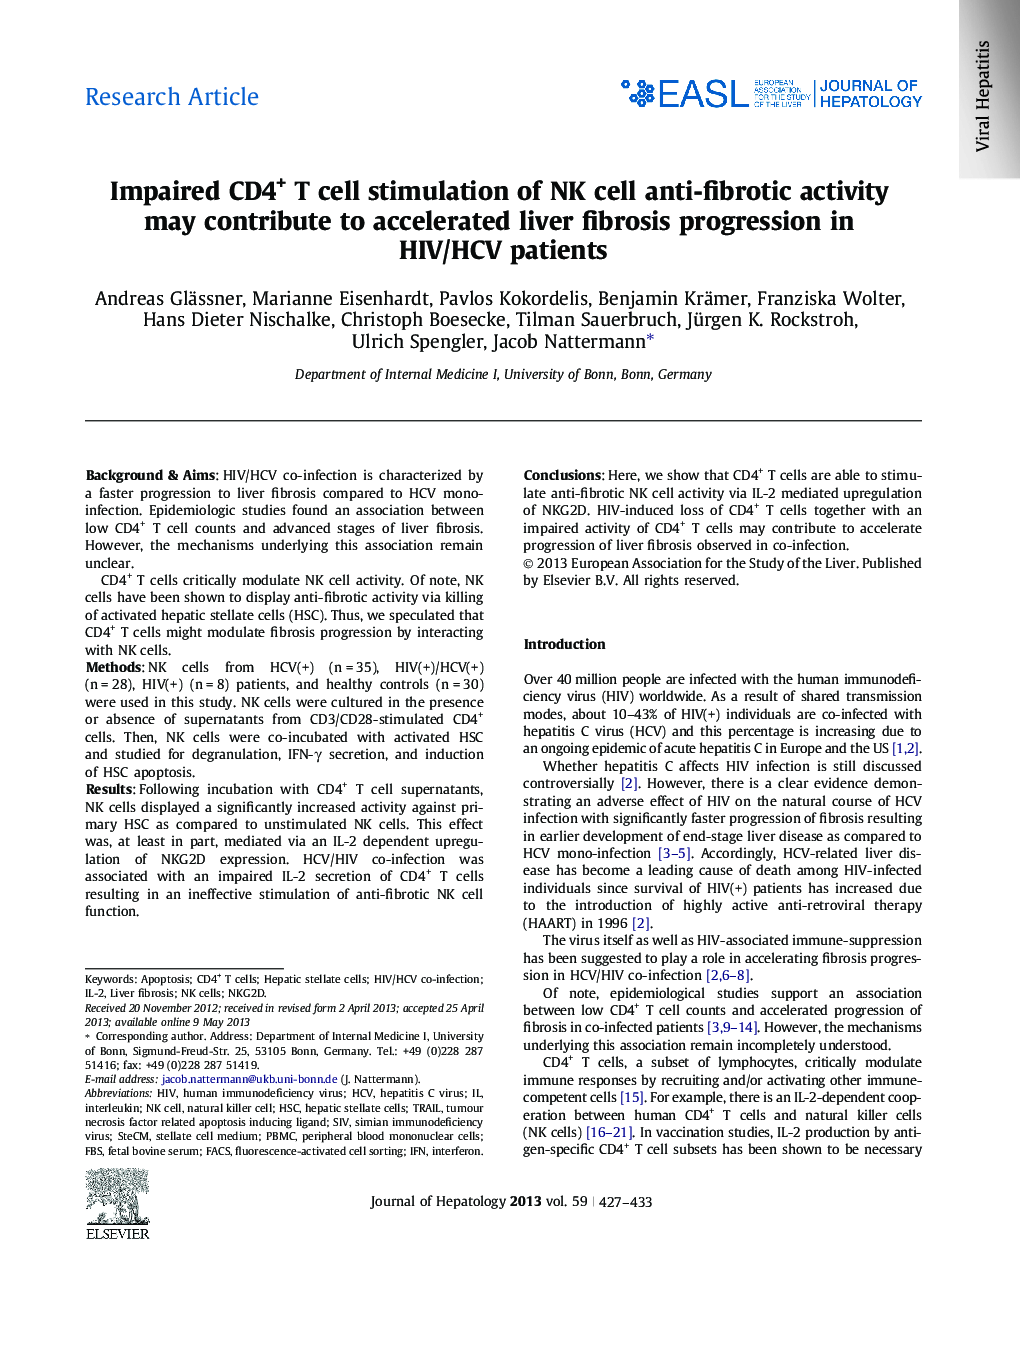 Research ArticleImpaired CD4+ T cell stimulation of NK cell anti-fibrotic activity may contribute to accelerated liver fibrosis progression in HIV/HCV patients